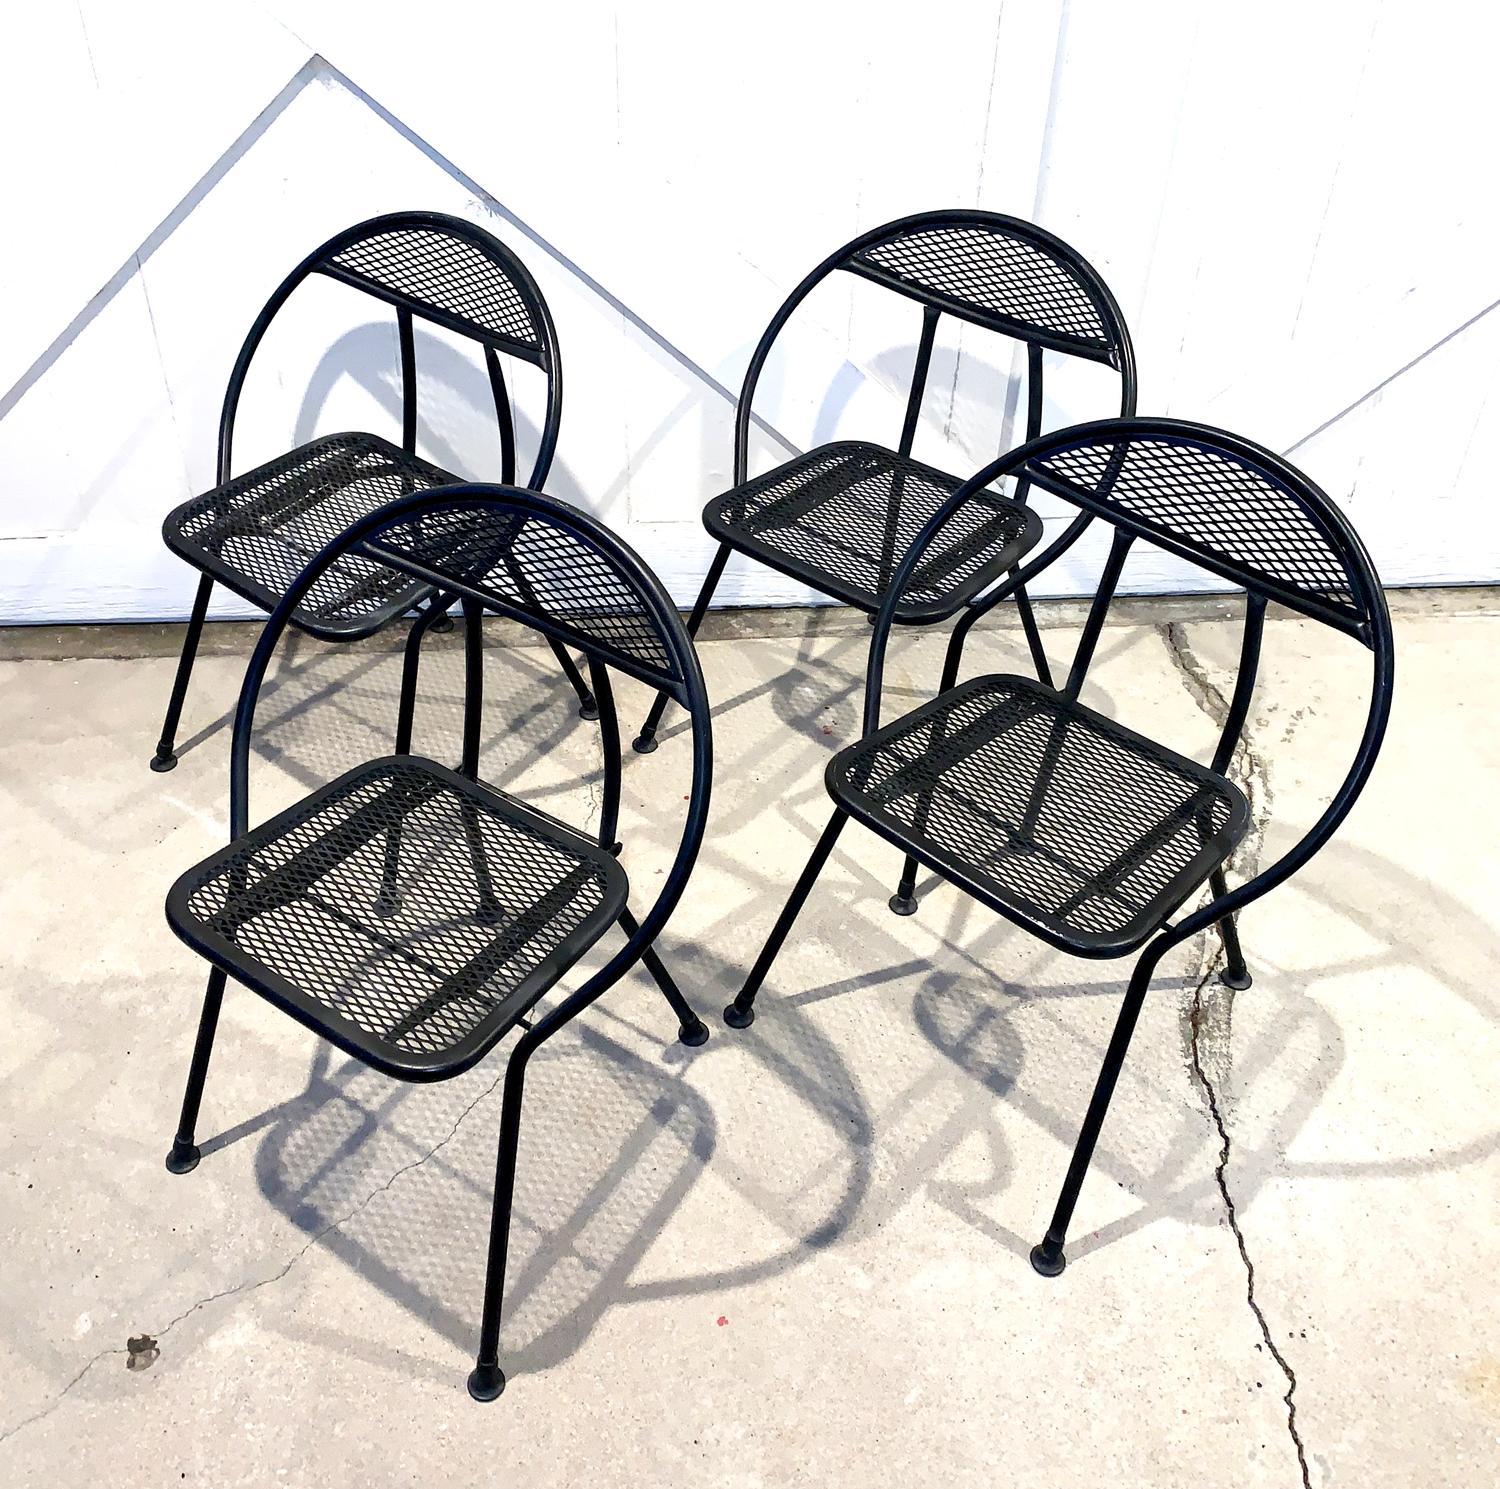 Powder-Coated Set of 4 Folding Chairs by Salterini for Rid-Jid